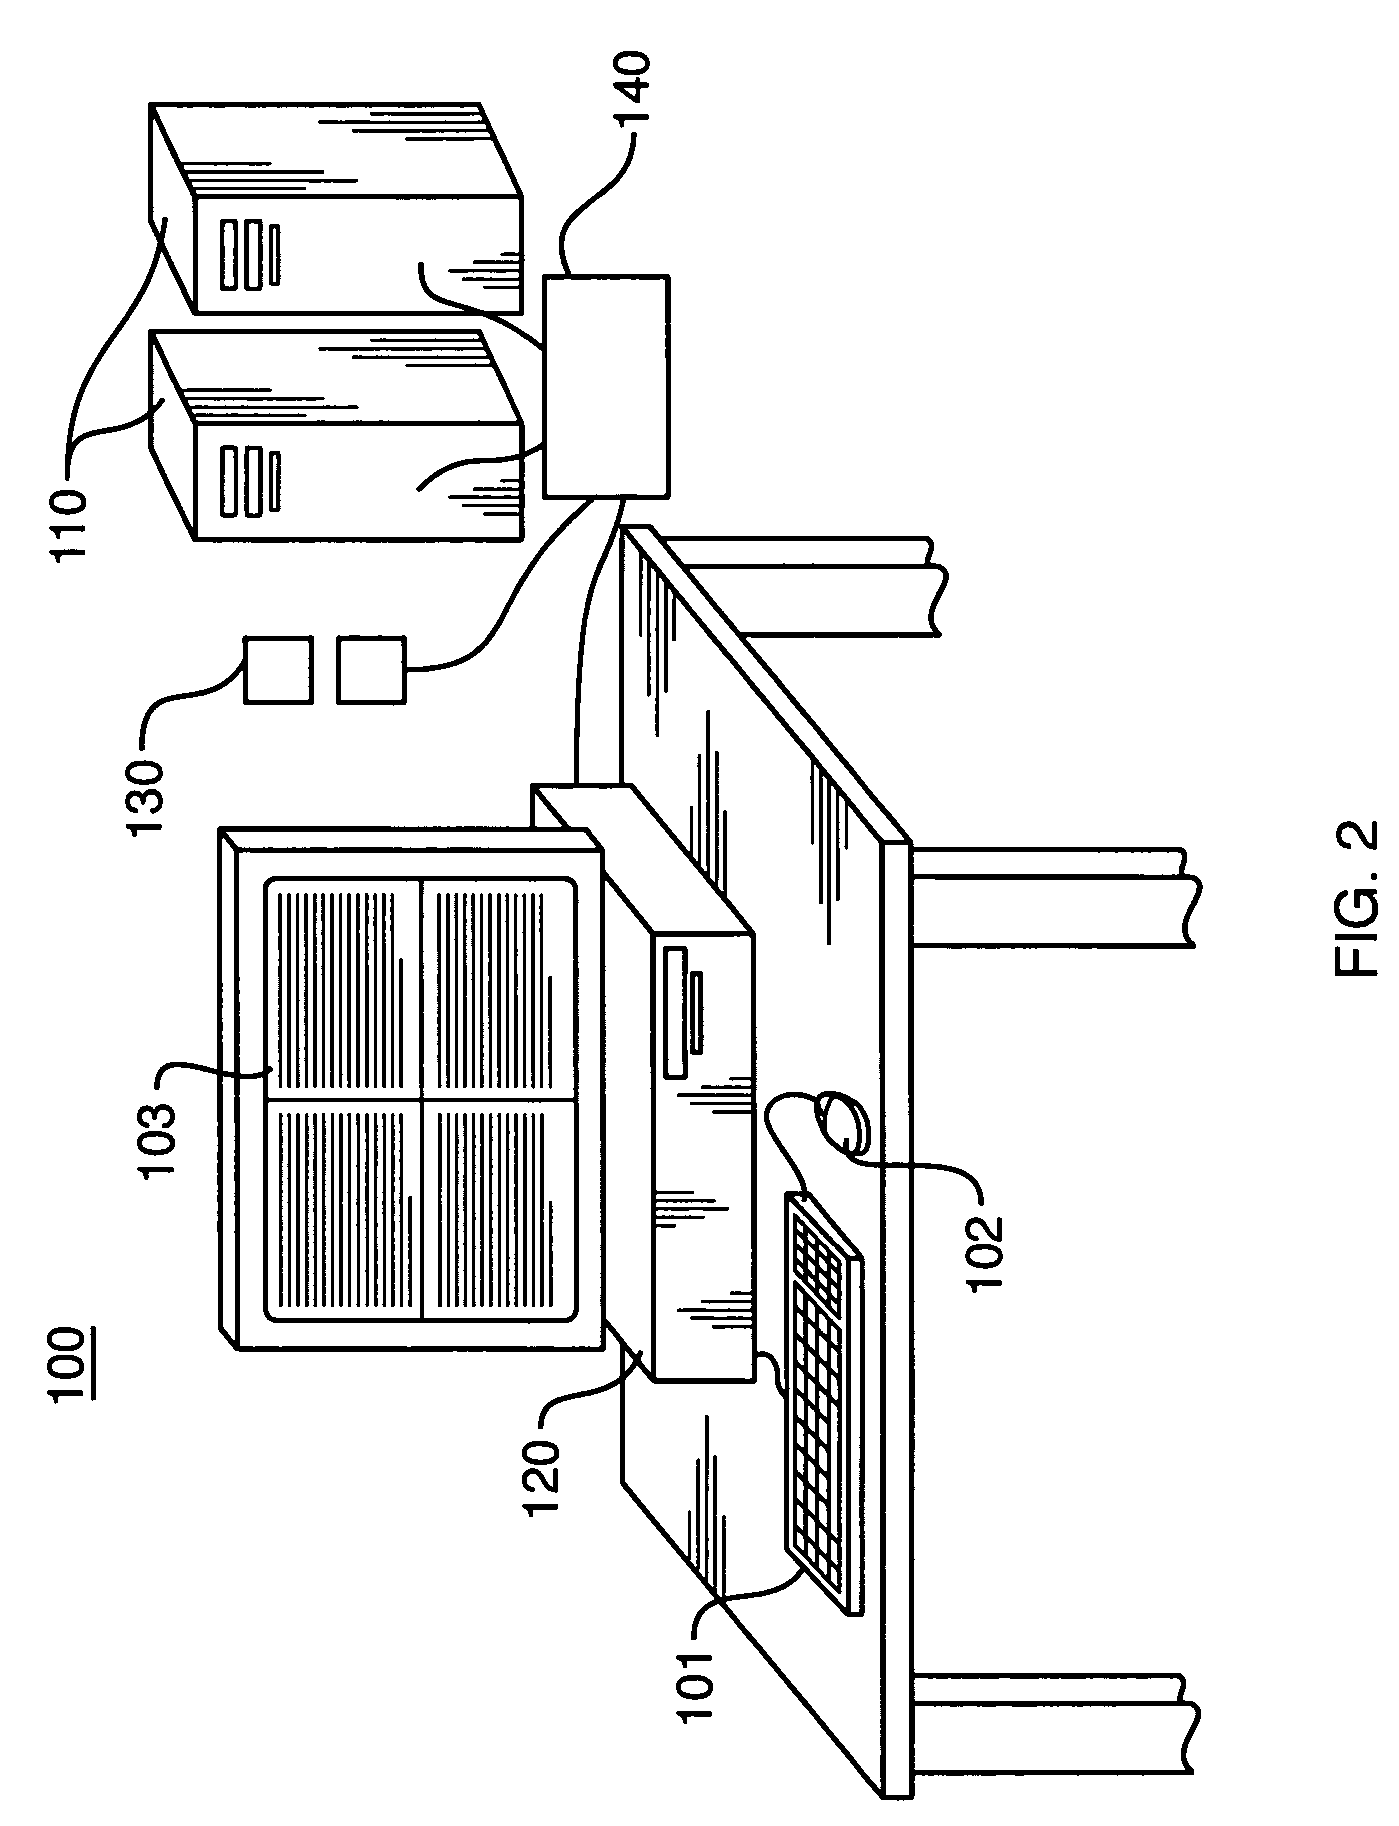 System and method to improve manufacturing